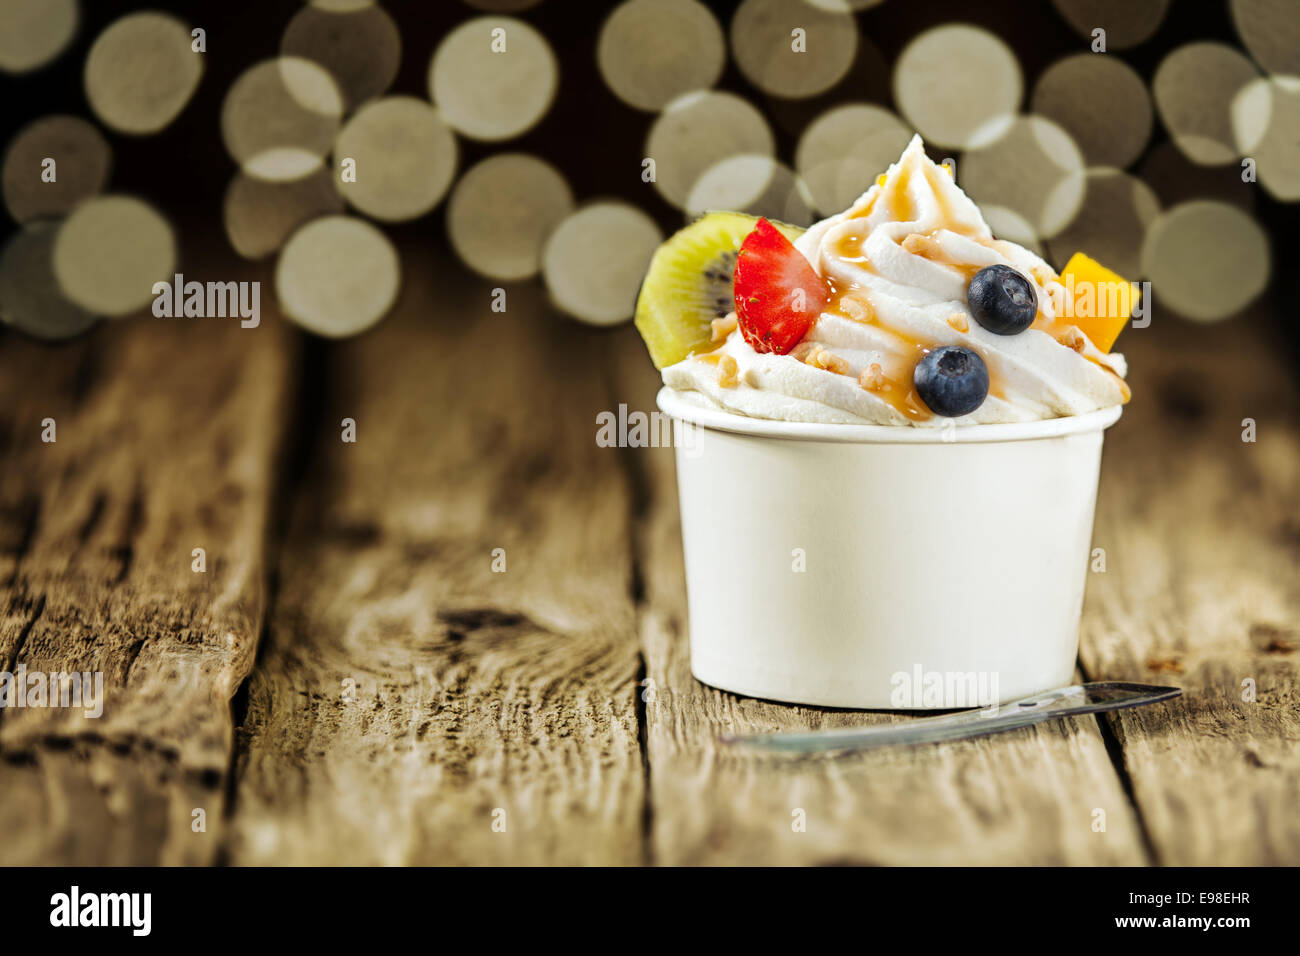 Creamy vanilla frozen yogurt topped with fresh tropical fruit served in a plastic takeaway tub with a disposable teaspoon on a wooden table with a background bokeh of party lights Stock Photo